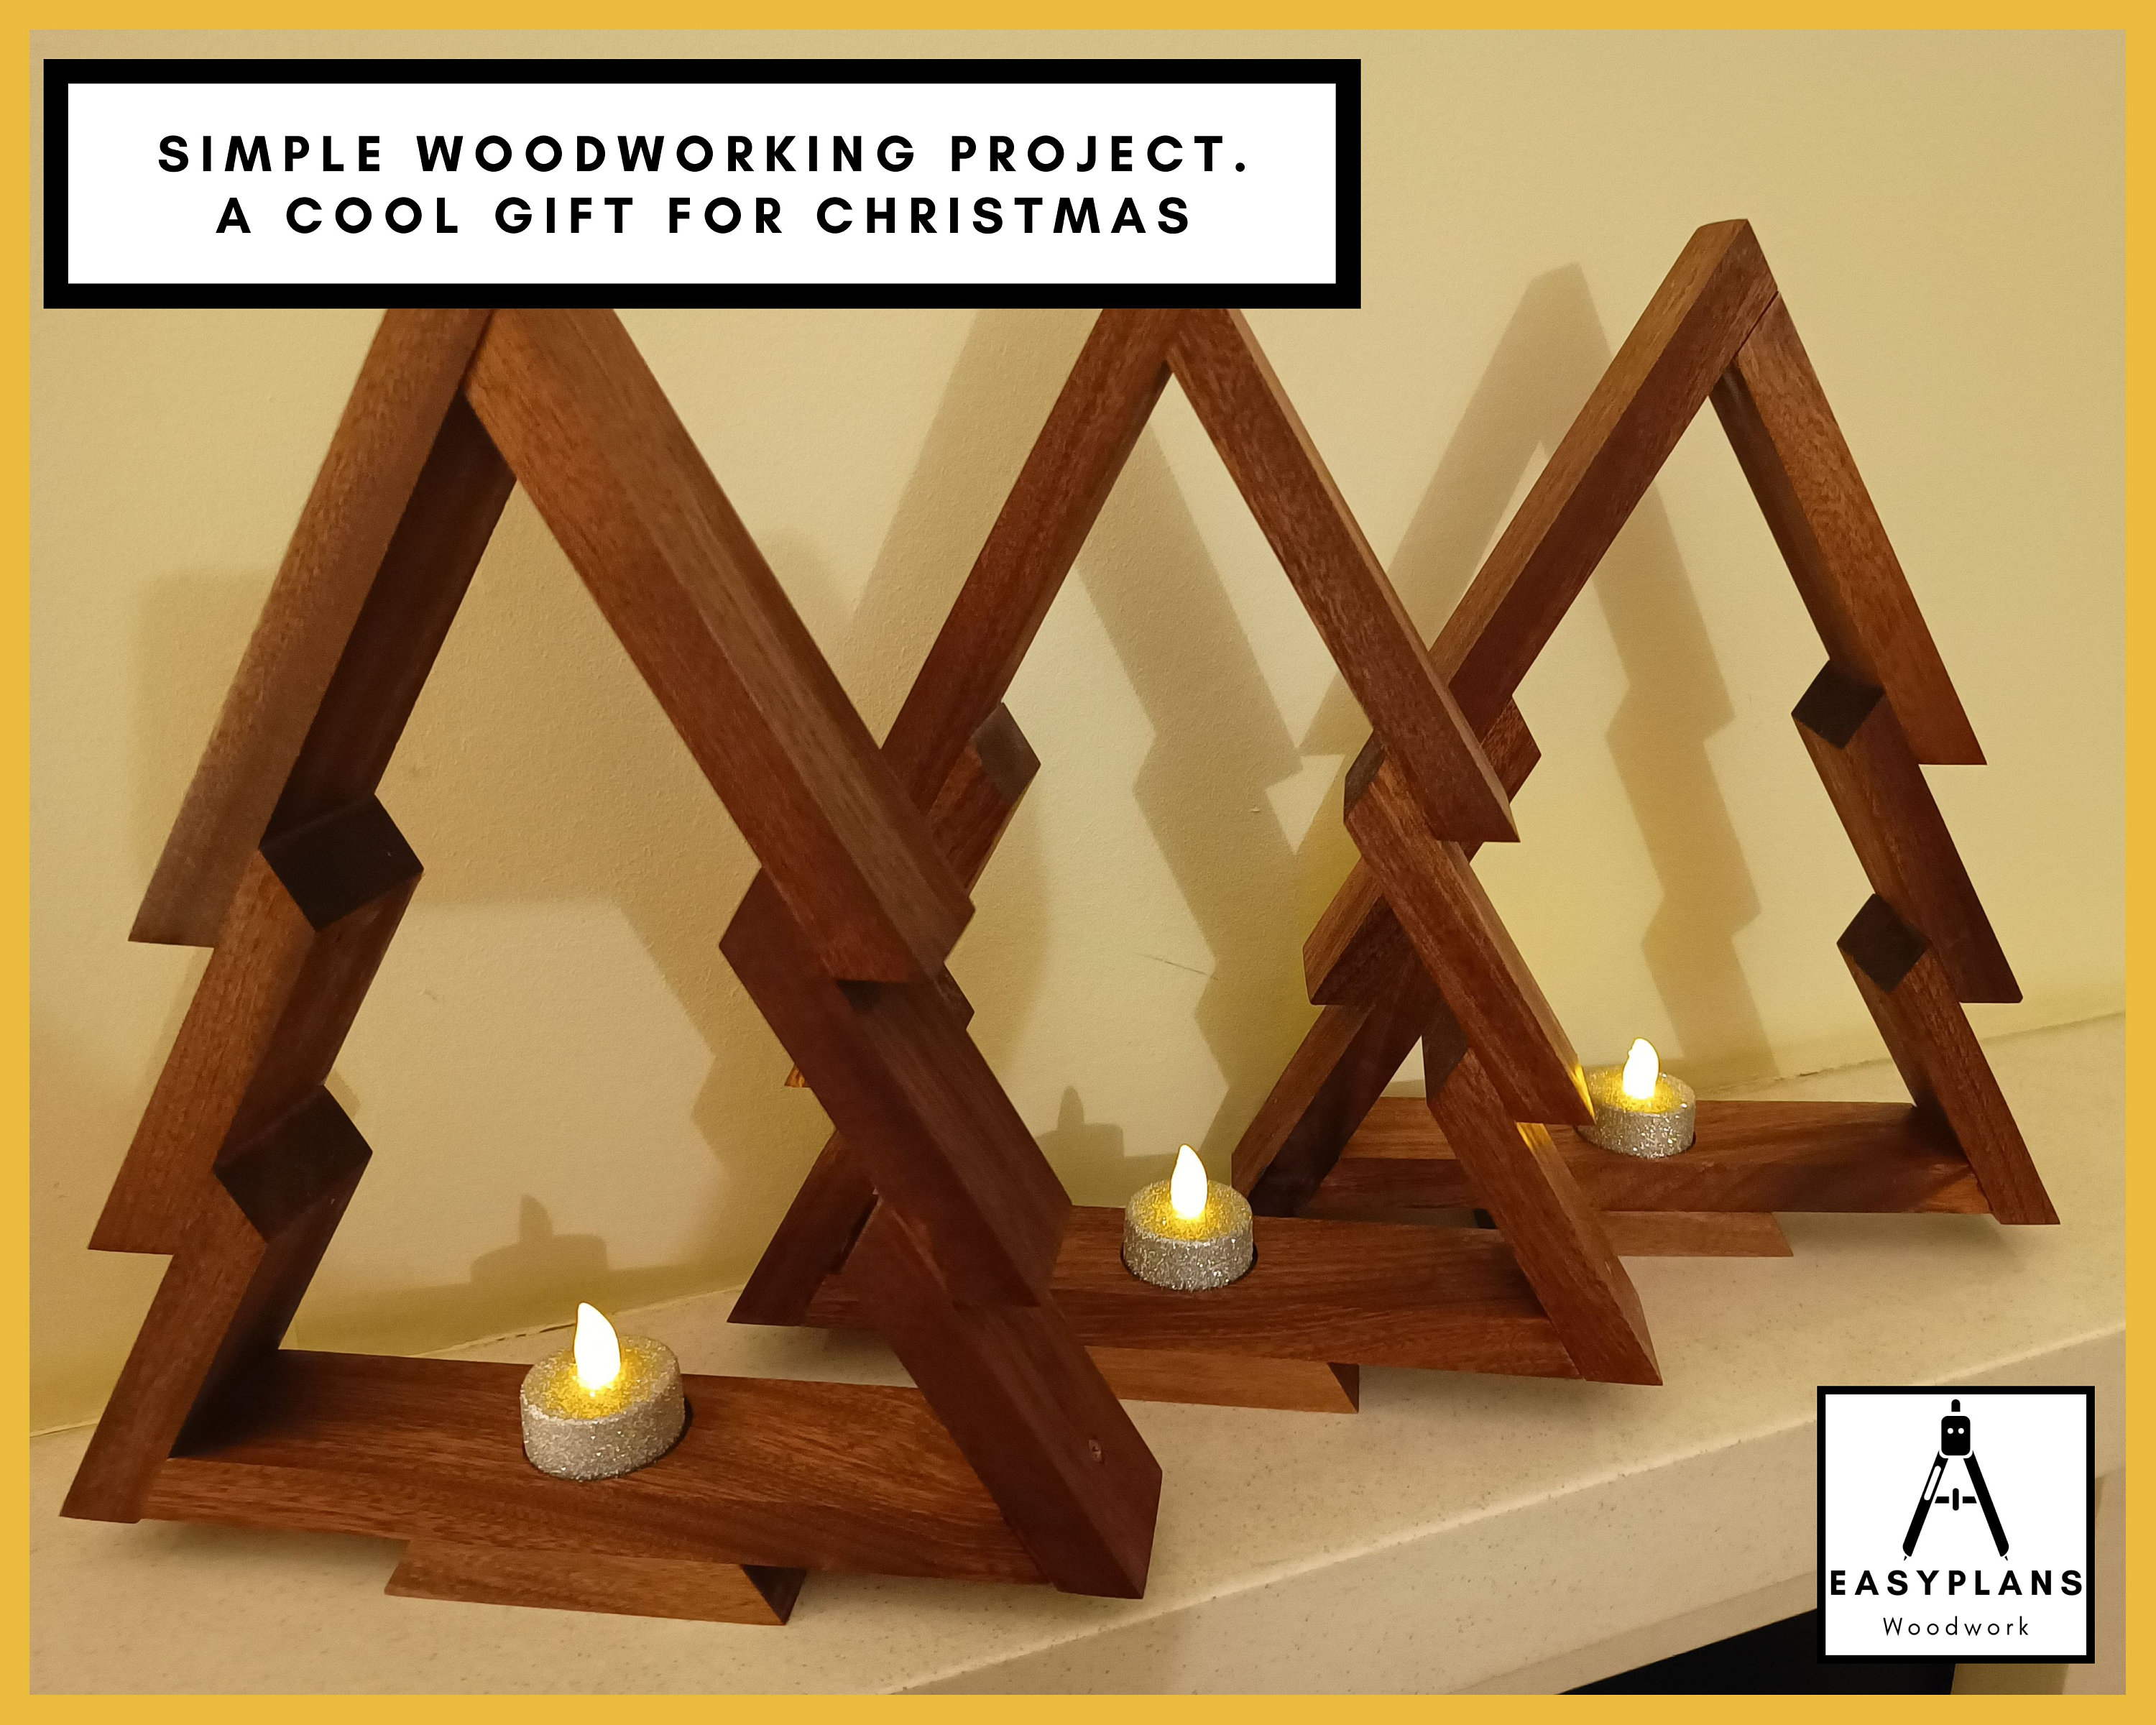 20 Woodworking Projects You Can Make as Gifts